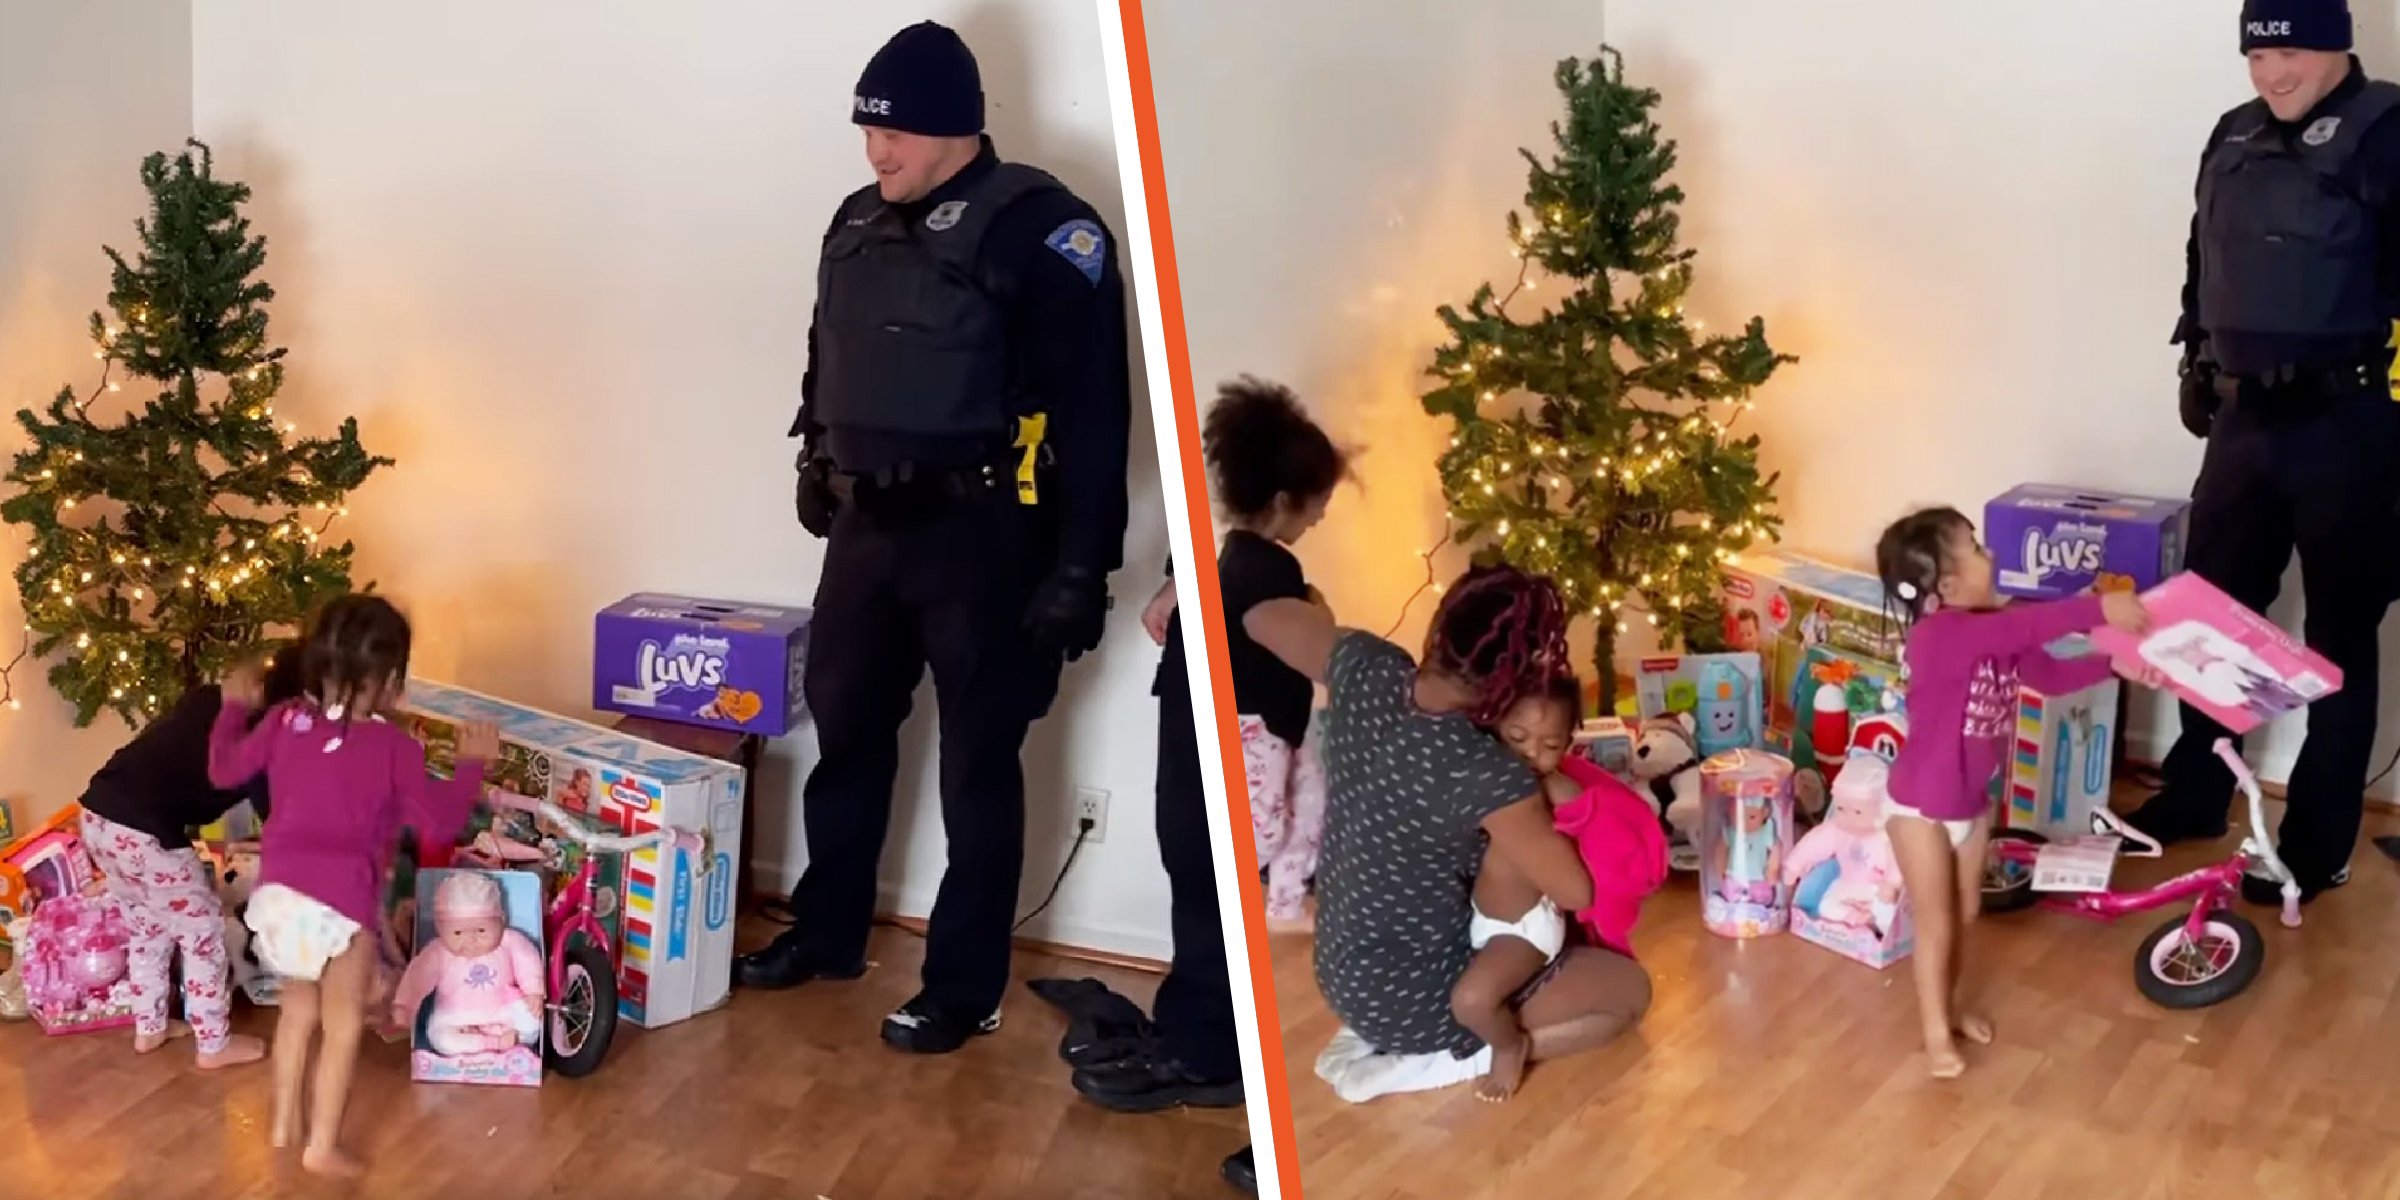 Police Officers and a South Bend, Indiana Family | Source: facebook.com/FOP36 